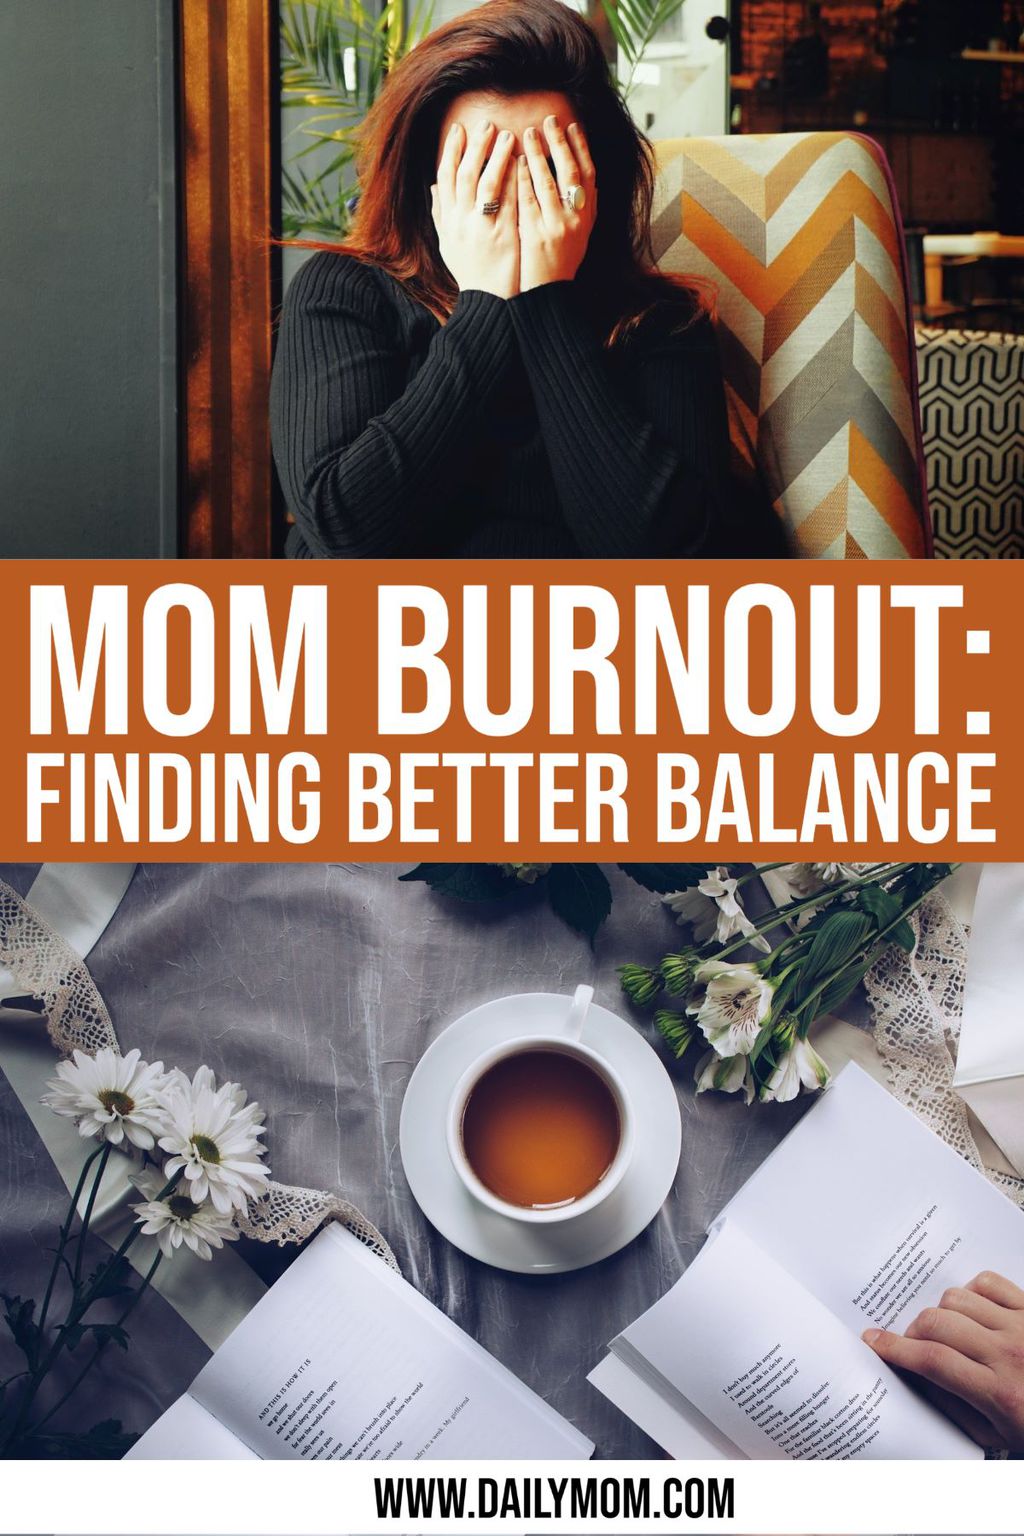 Daily-mom-parent-portal-Fighting Mom Burnout: The Mindful Parenting Guide For Finding Better Balance